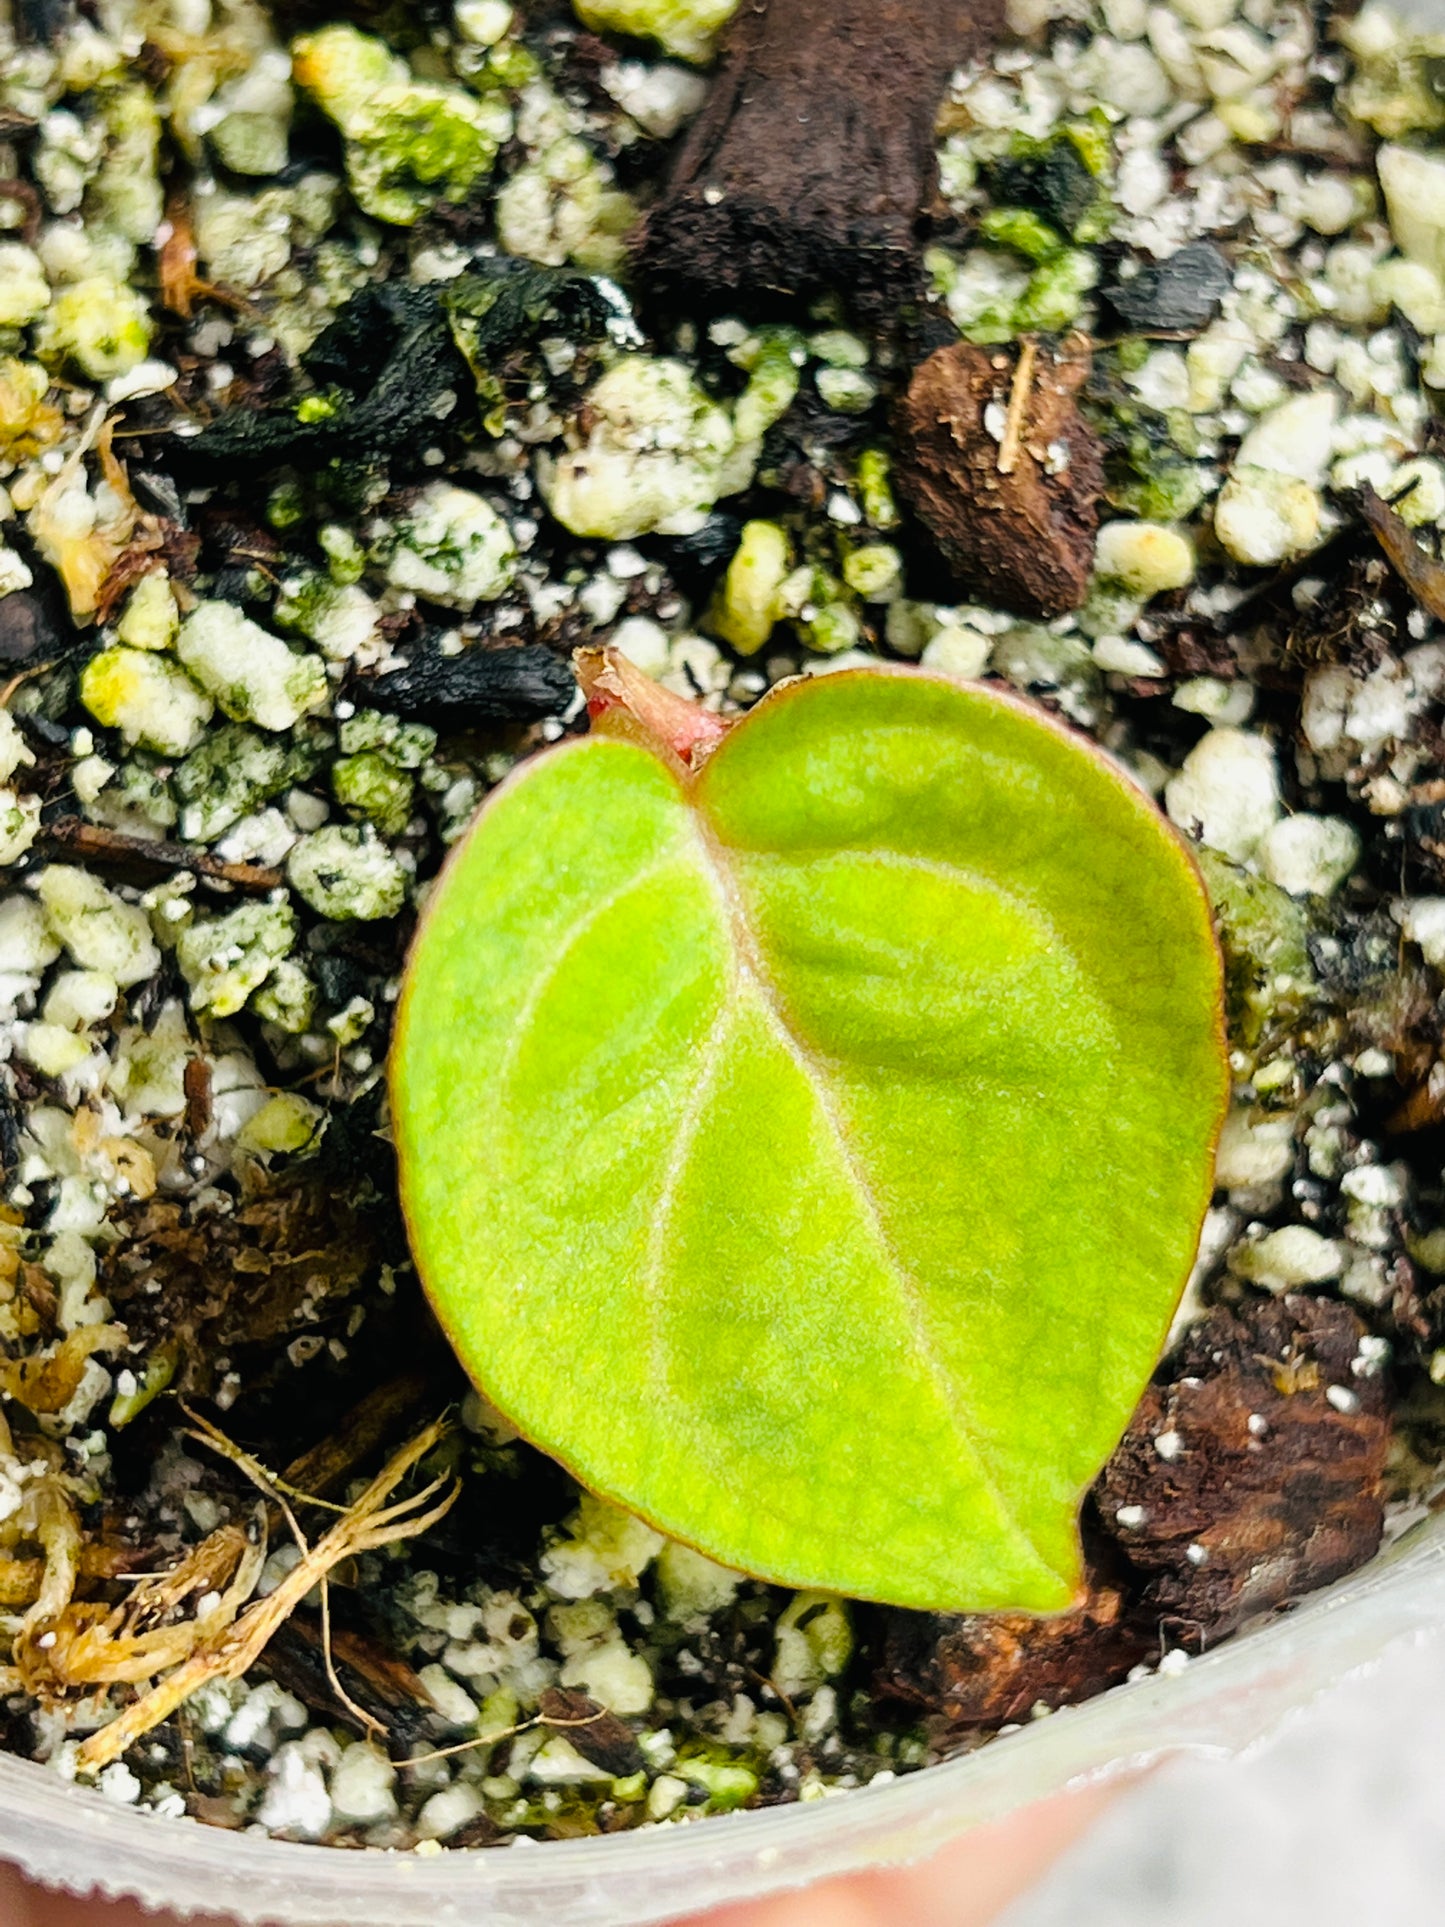 Anthurium Raven’s heart rooted